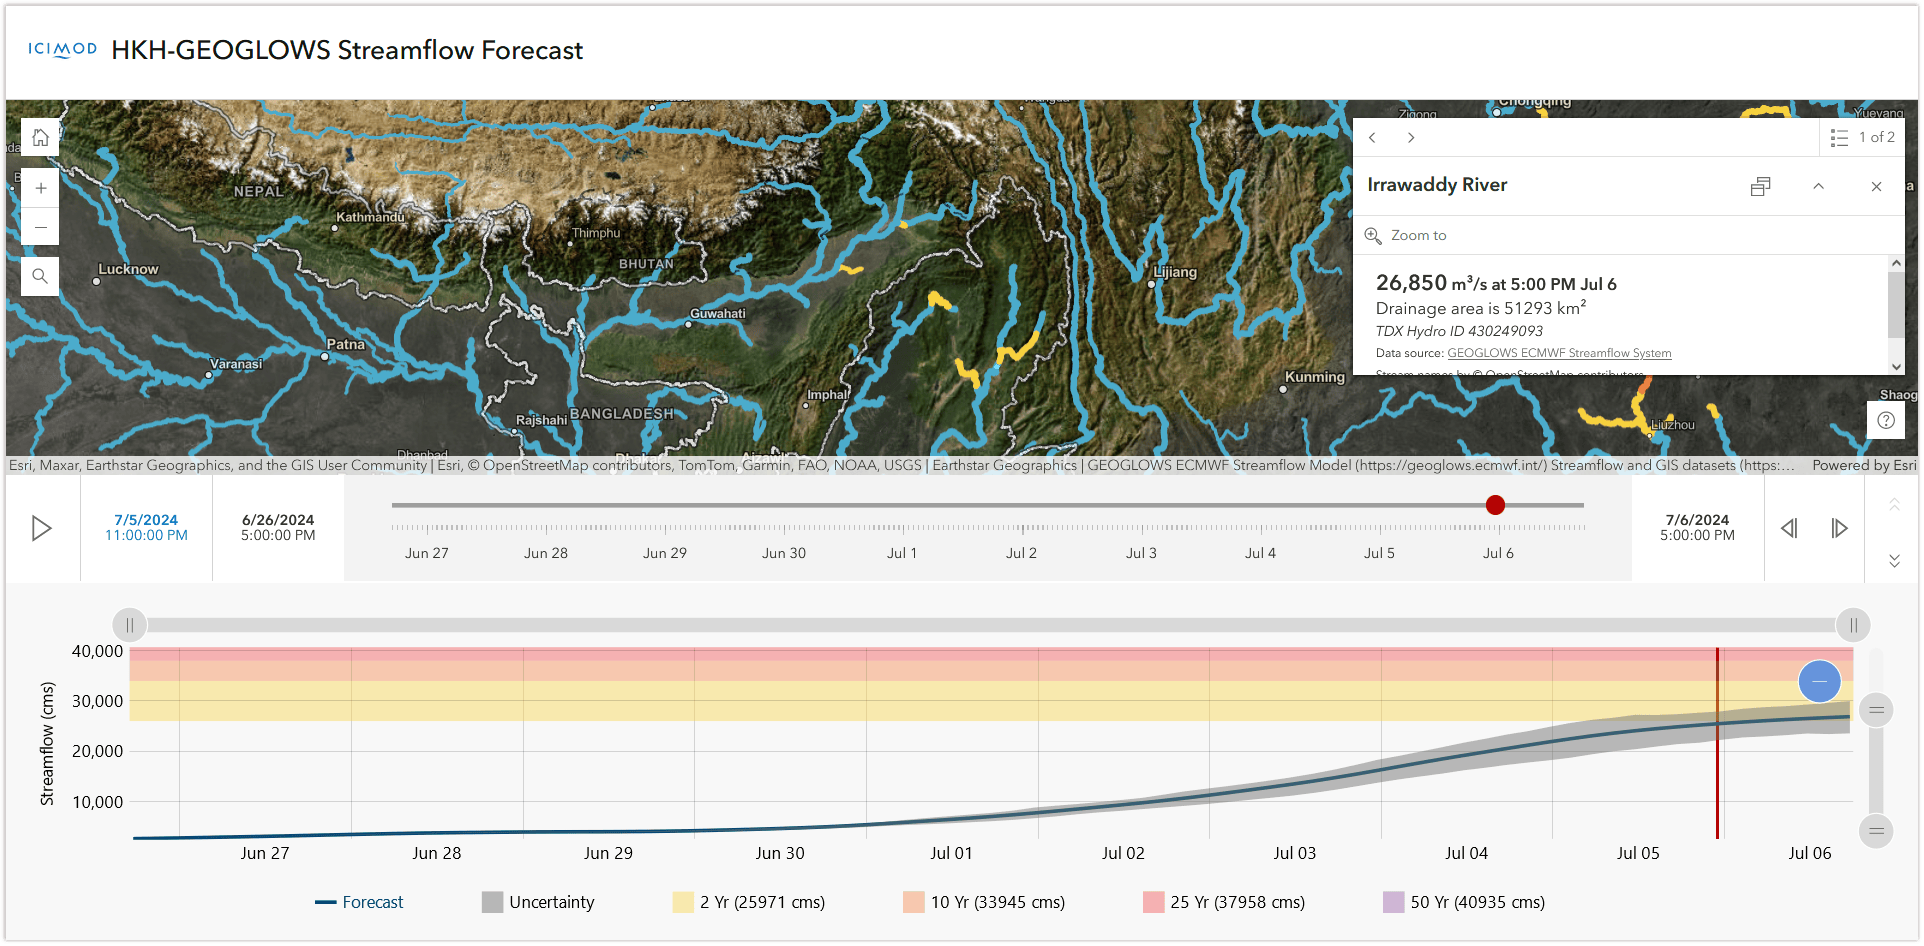 ICIMOD GEOGLOWS / ECMWF Streamflow Forecast system for water situational awareness, mitigating water risk, ensuring sustainable water use. Click image to launch the app.